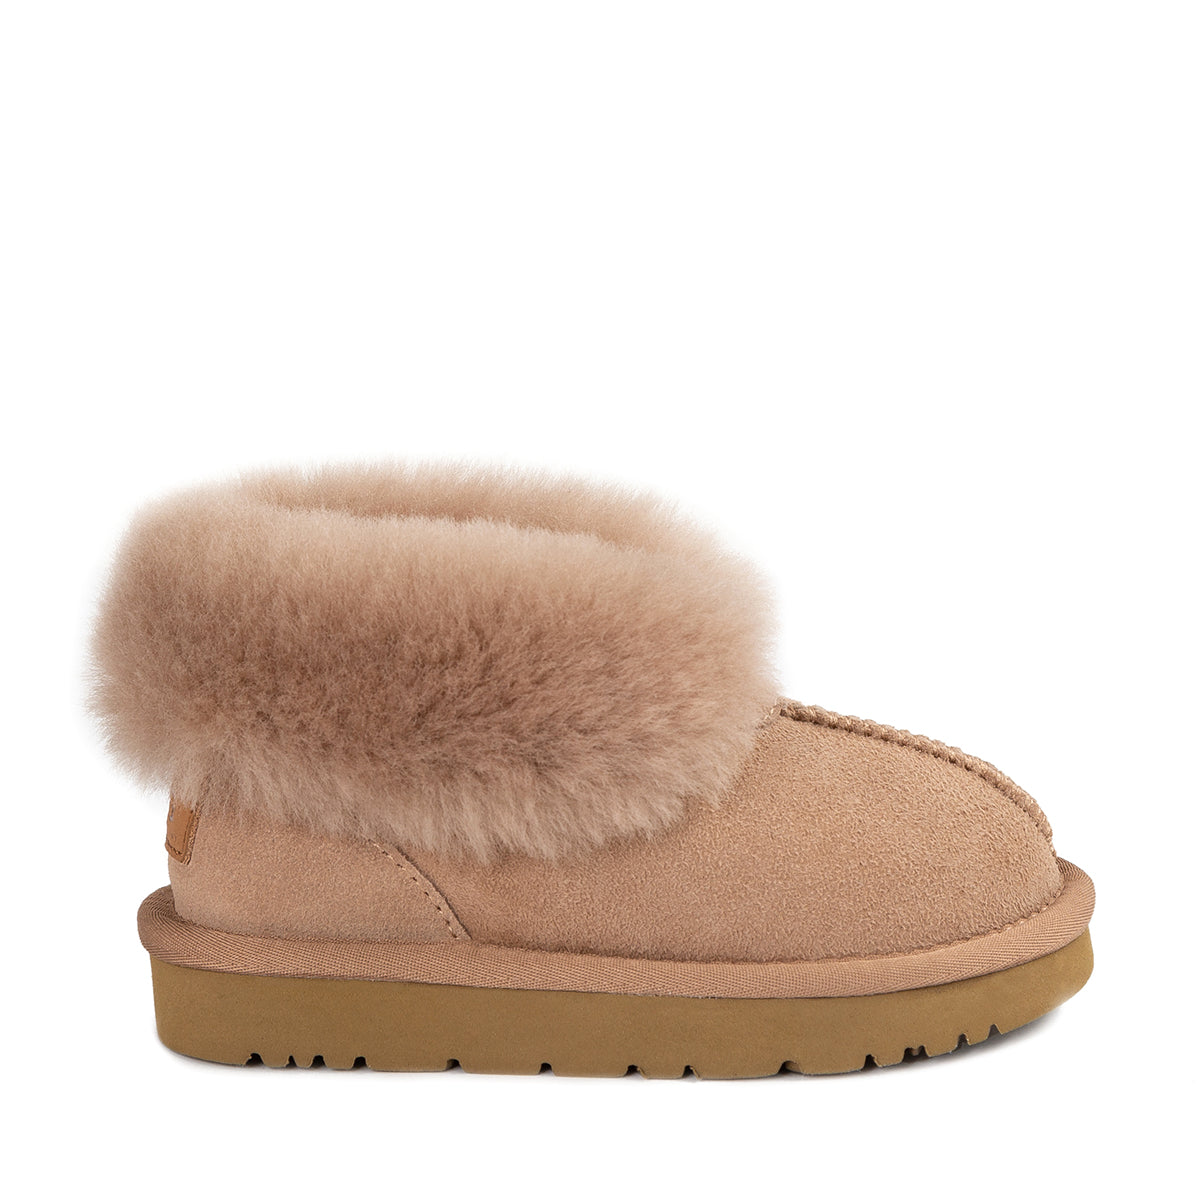 UGG Kids MELO slippers